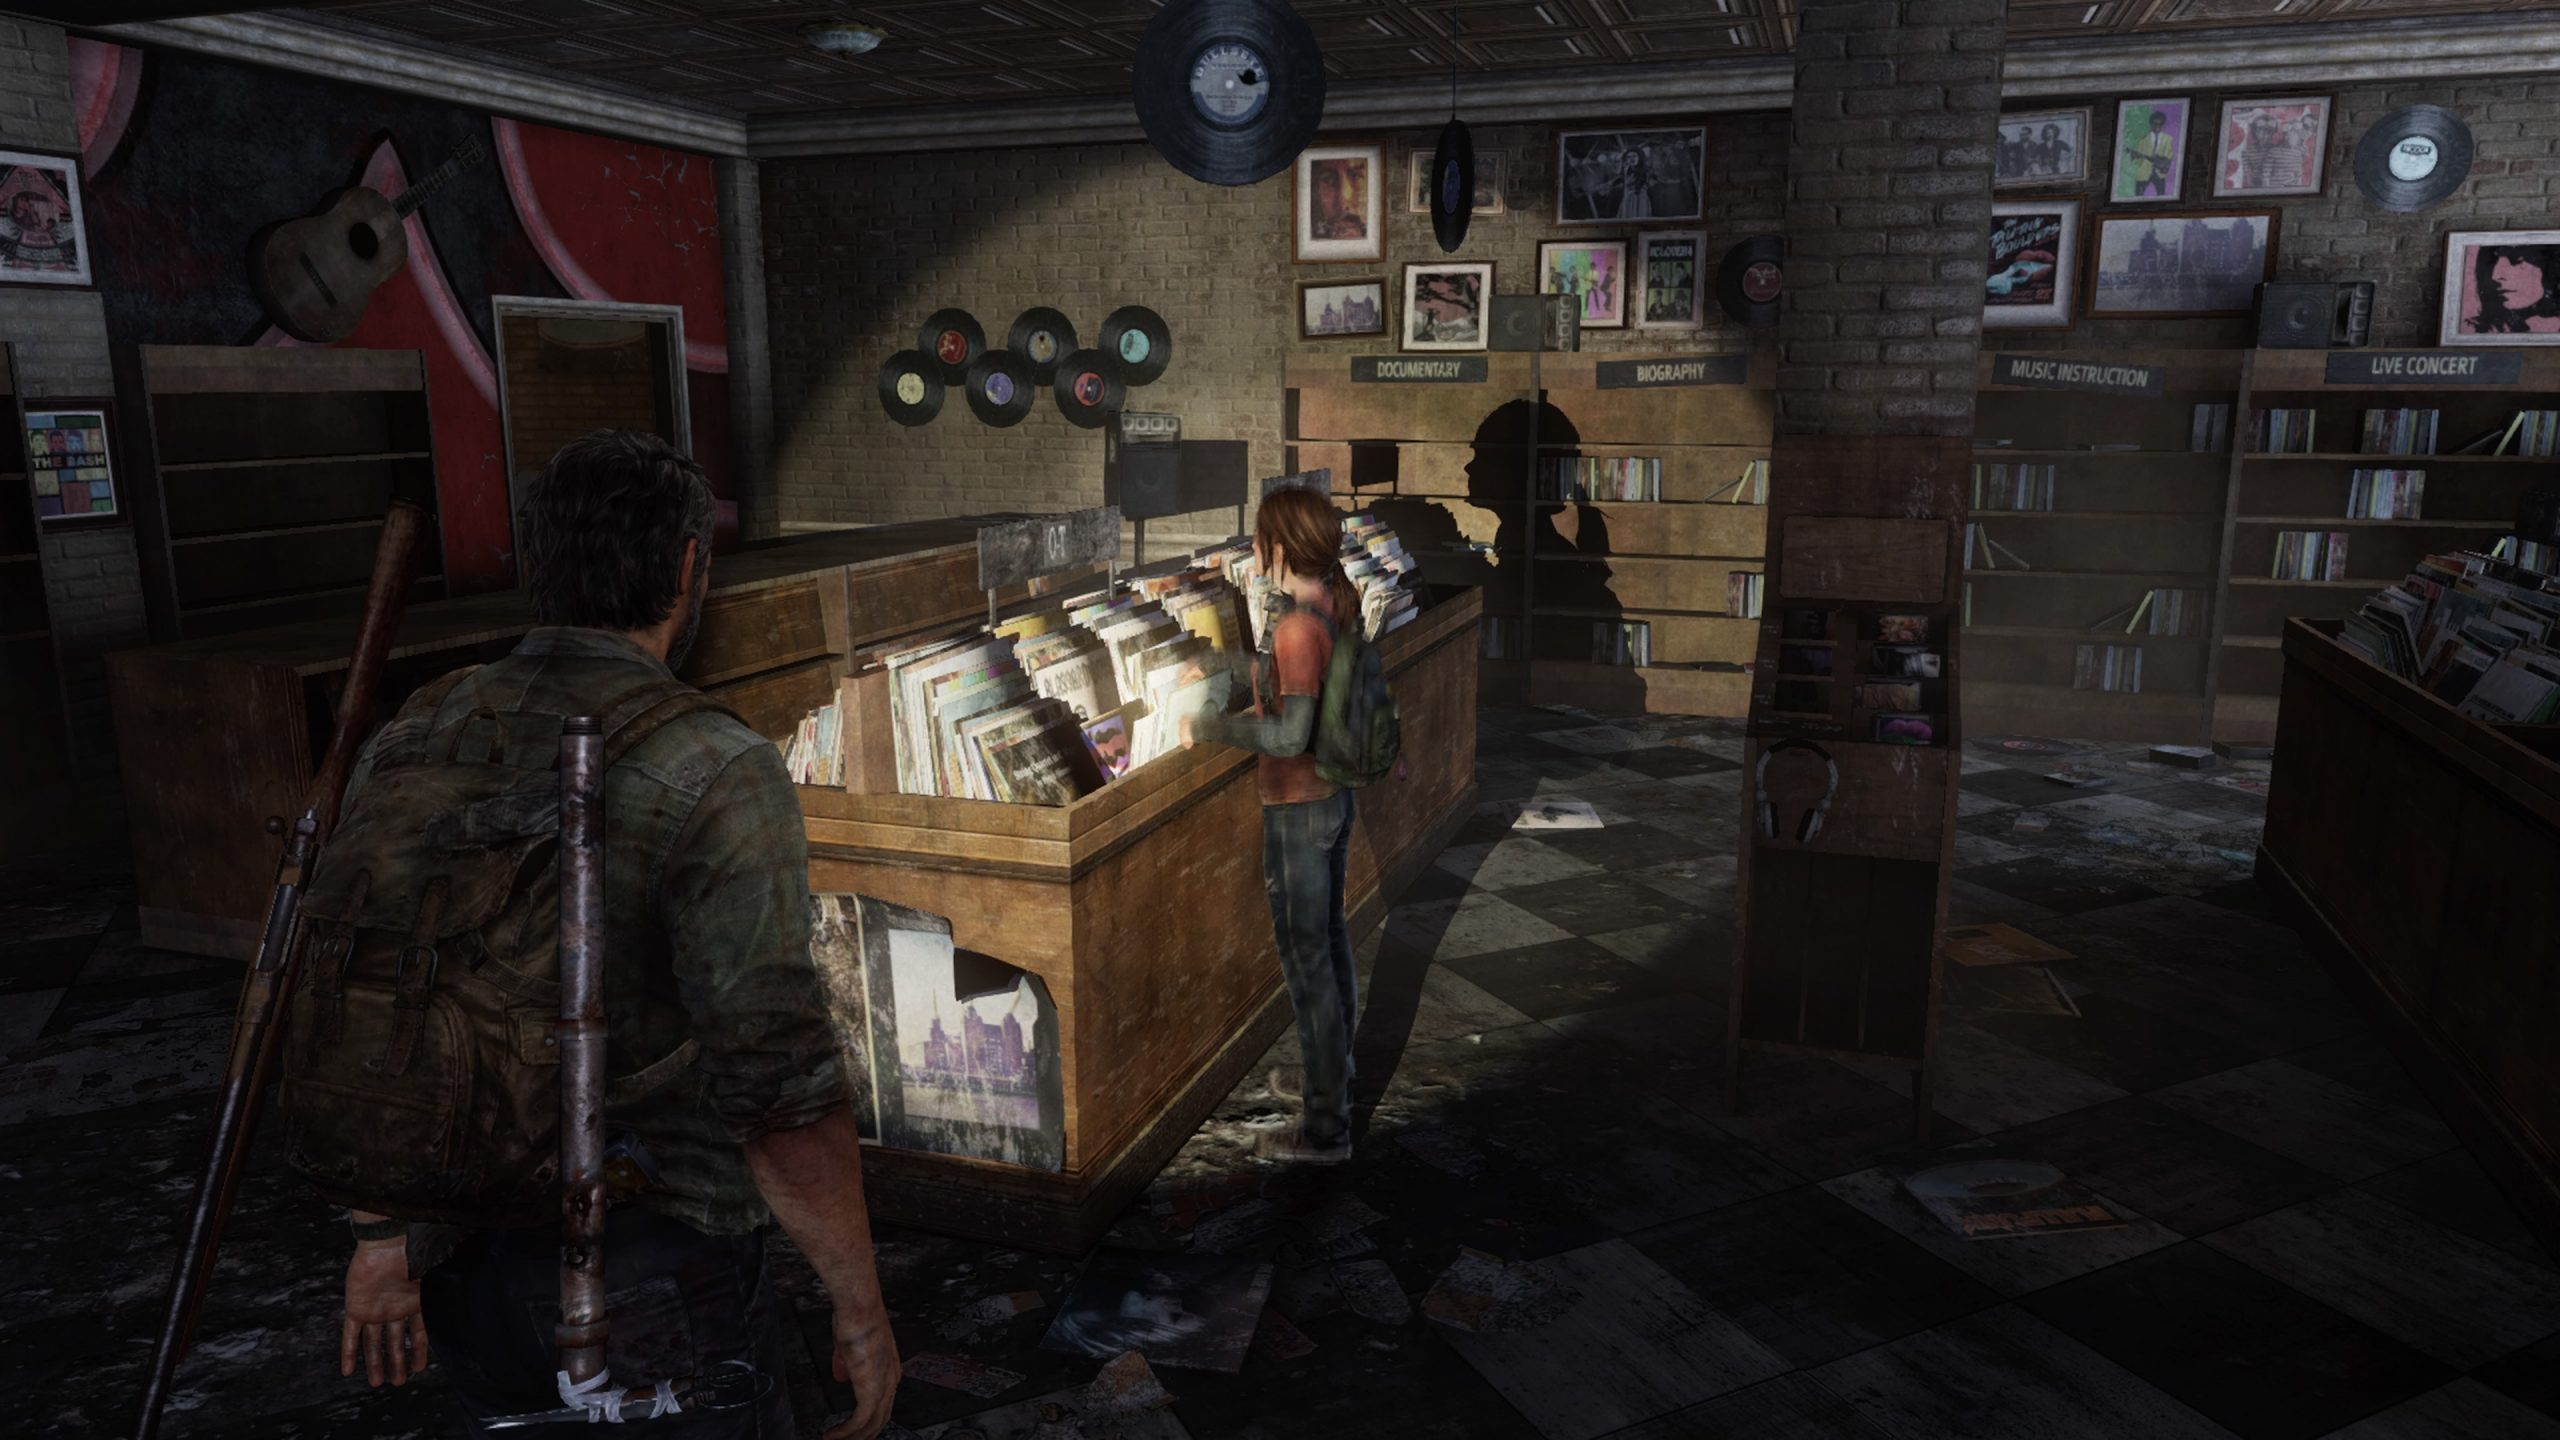 The Last of Us Episode 3 Takes a Page From Up - And It's Beautiful